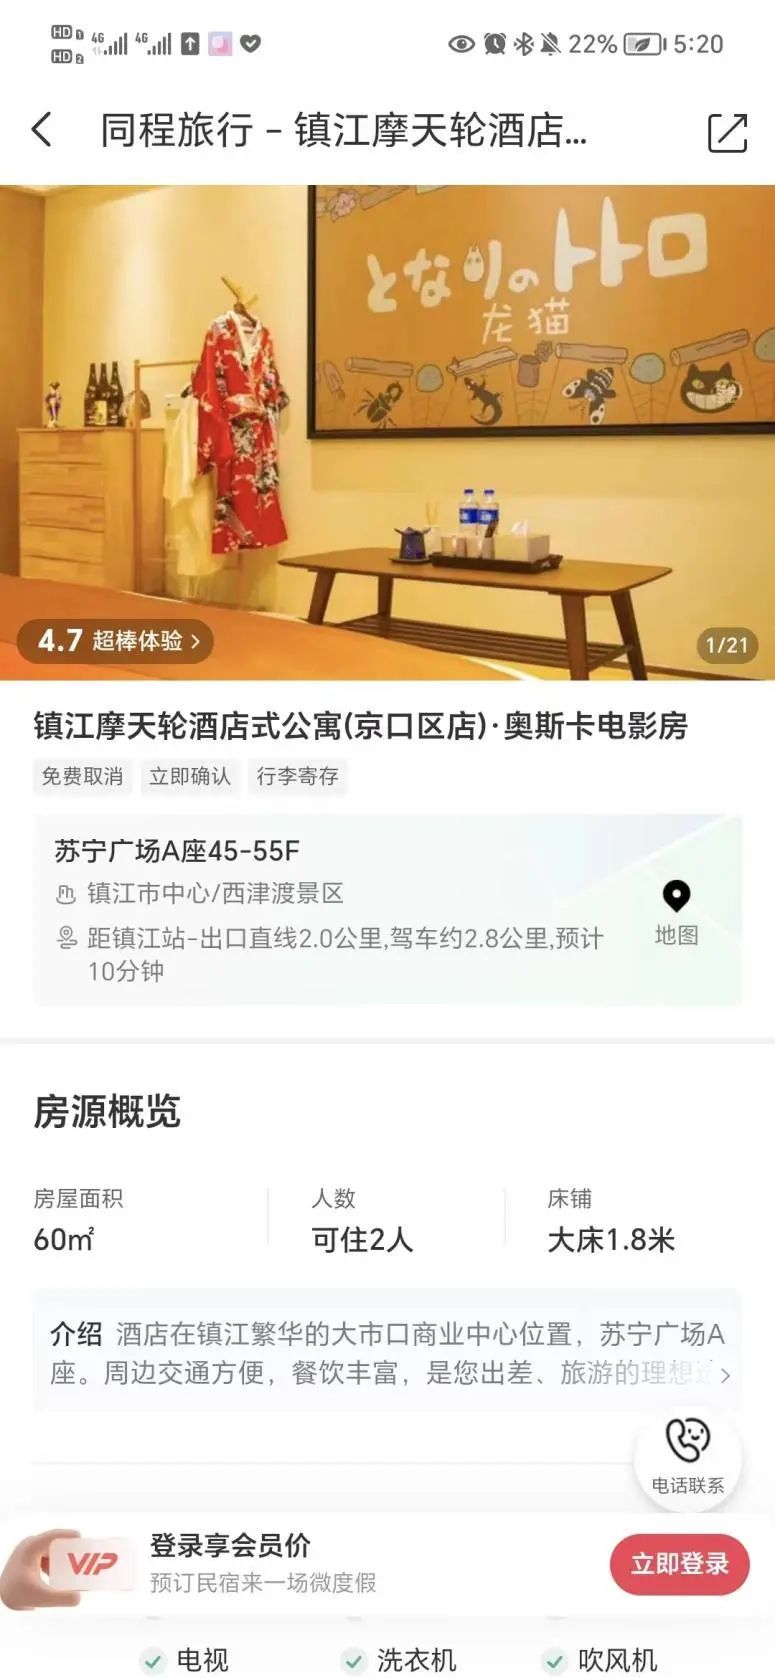 Moving into an apartment? The platform pays three times the room fee as compensation, and book a hotel online. Lawyer Huang Wende and hotel